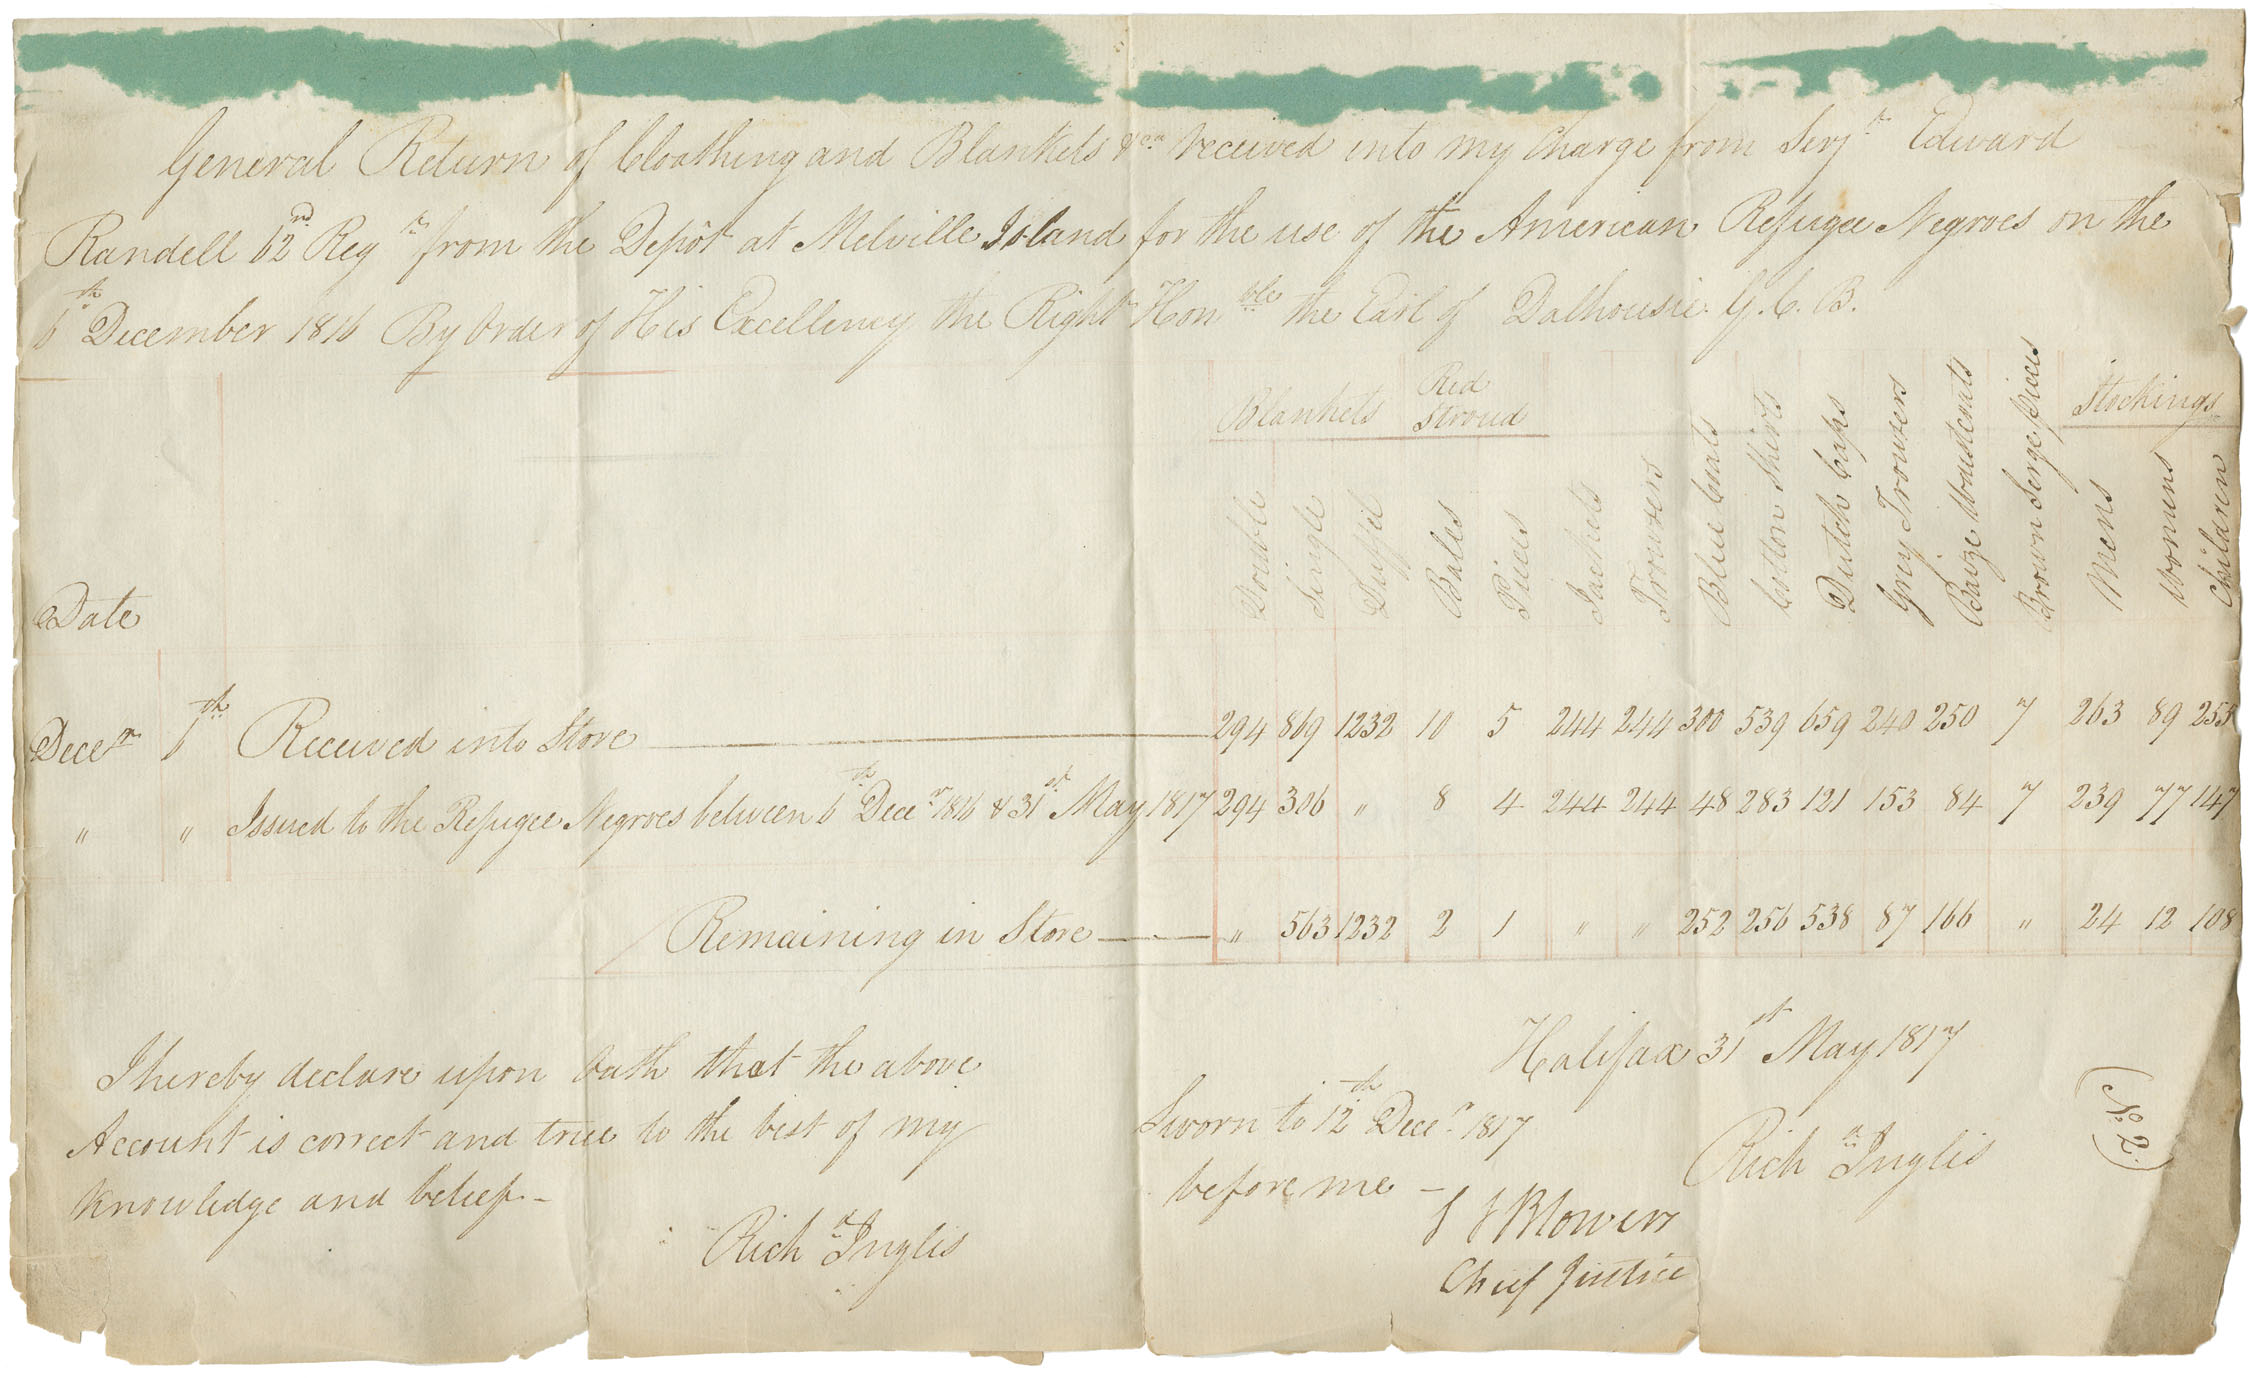 General return of clothing, etc, from depot at Melville Island for the use of the Black Refugees, by order of Lord Dalhousie